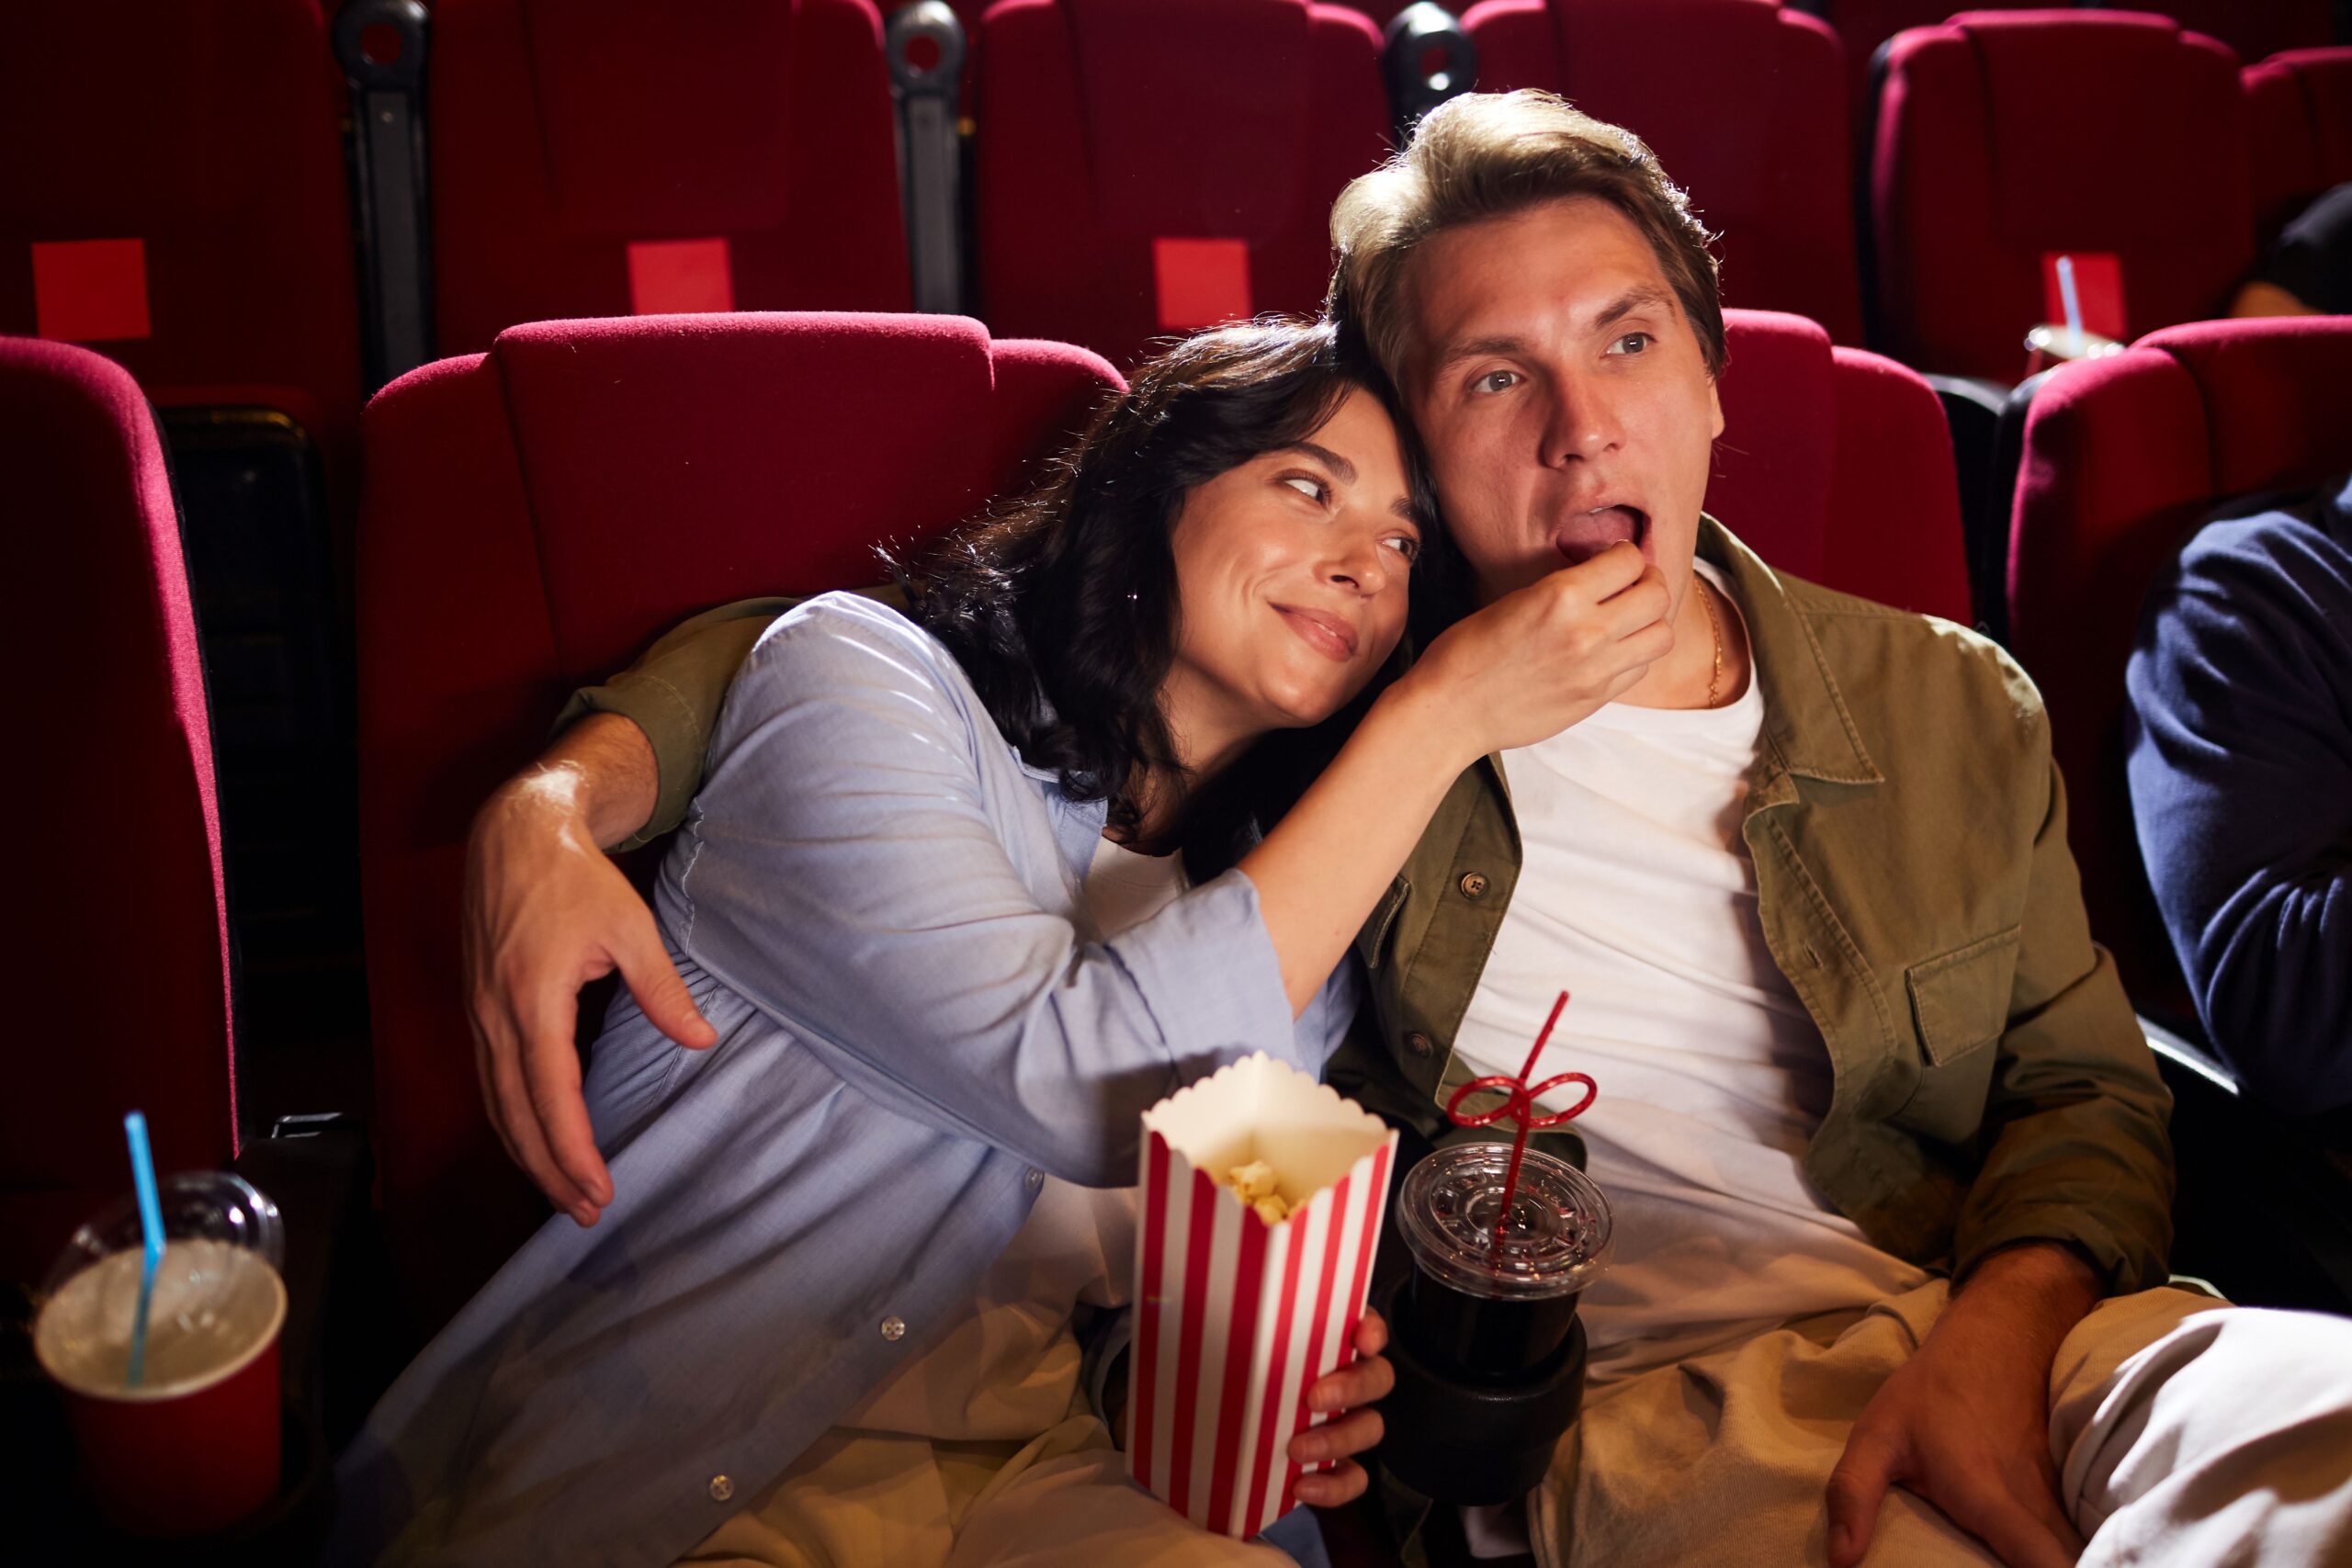 Couple eat popcorn together at movie theater